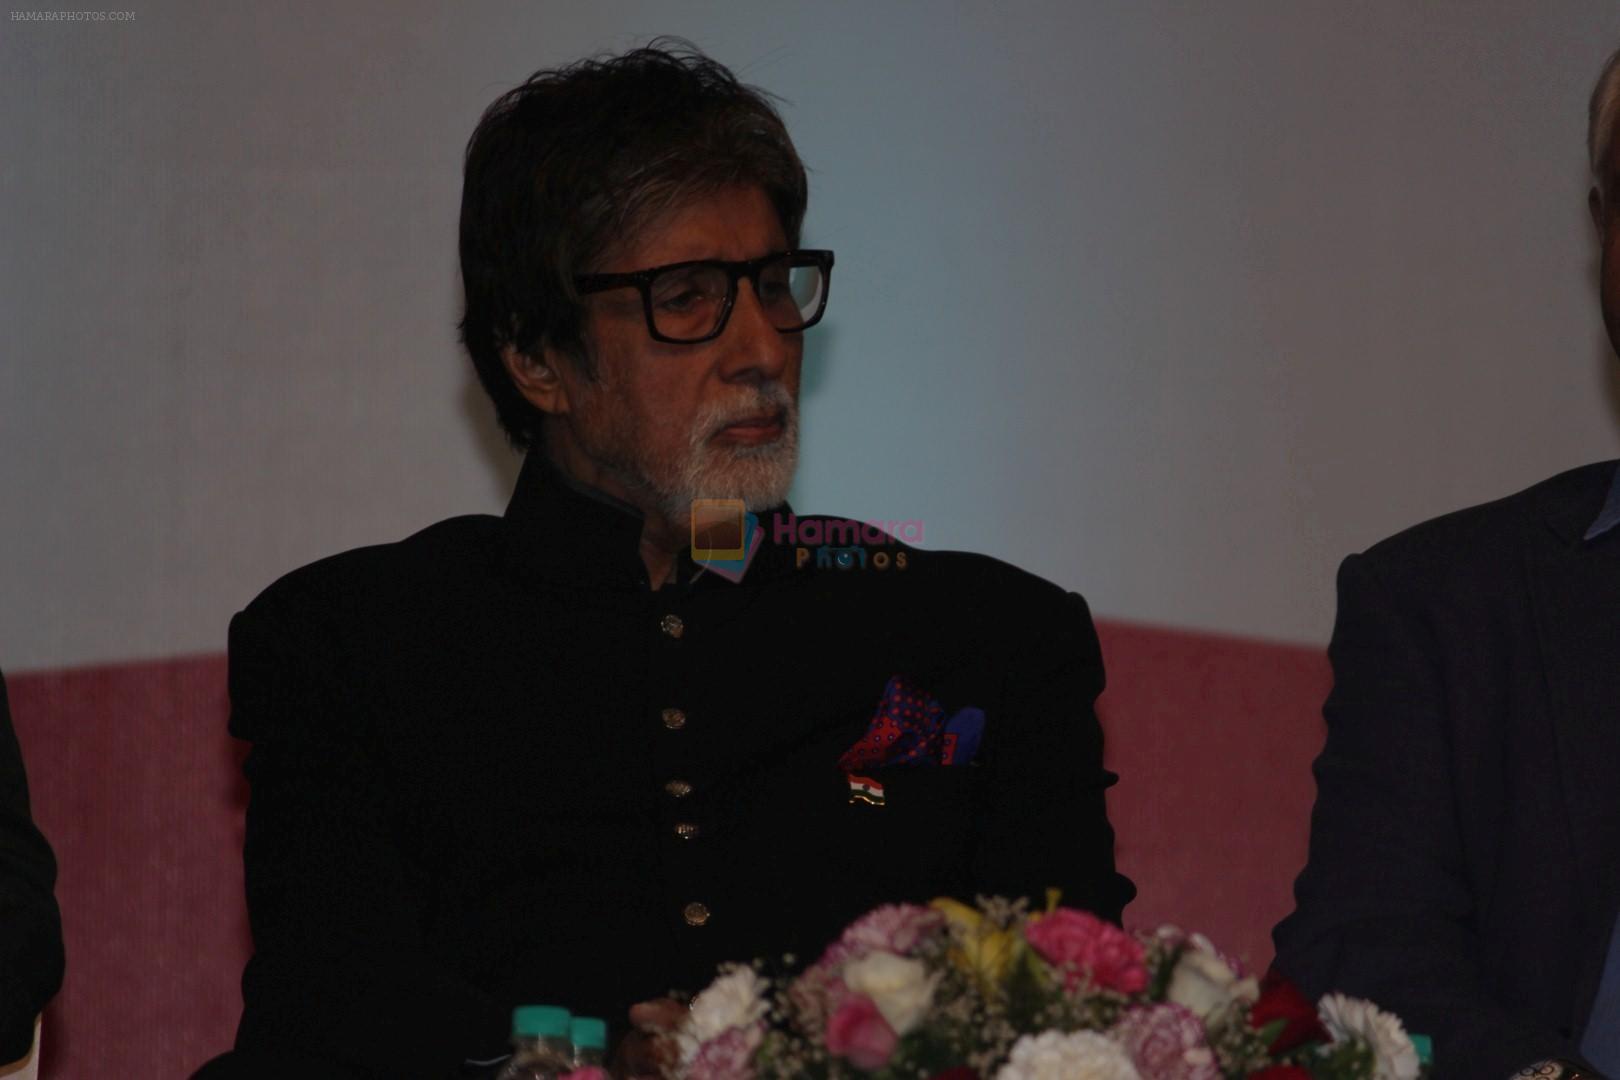 Amitabh Bachchan Launches Ramesh Sippy Academy Of Cinema & Entertainment on 9th March 2017